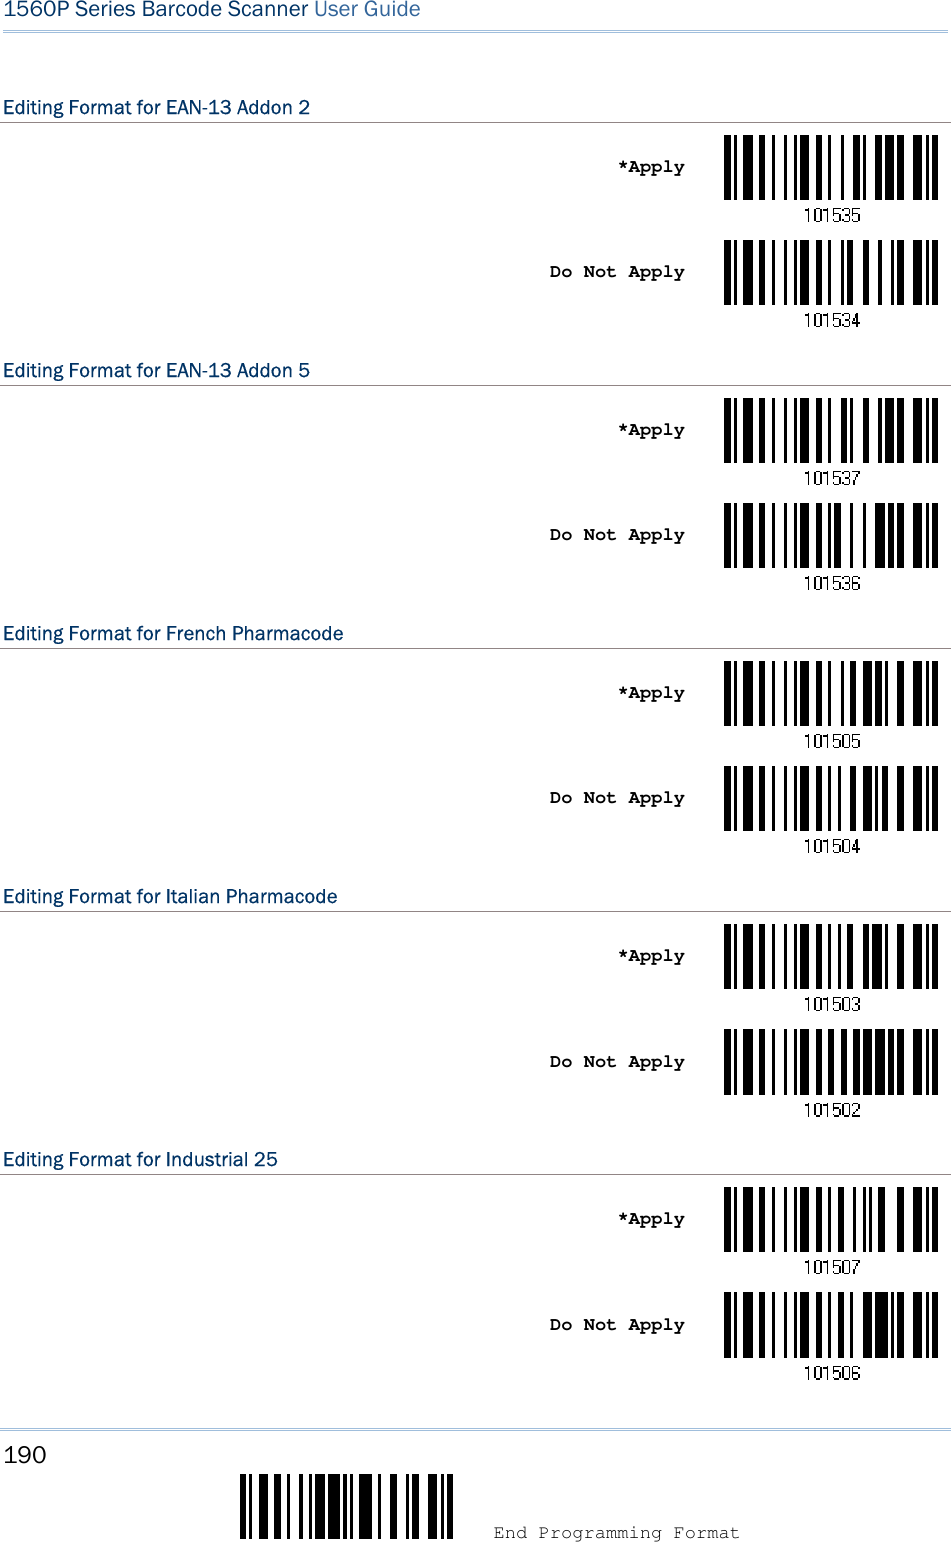 190  End Programming Format 1560P Series Barcode Scanner User Guide Editing Format for EAN-13 Addon 2 *ApplyDo Not Apply Editing Format for EAN-13 Addon 5 *ApplyDo Not Apply Editing Format for French Pharmacode *ApplyDo Not Apply Editing Format for Italian Pharmacode *ApplyDo Not Apply Editing Format for Industrial 25 *ApplyDo Not Apply 